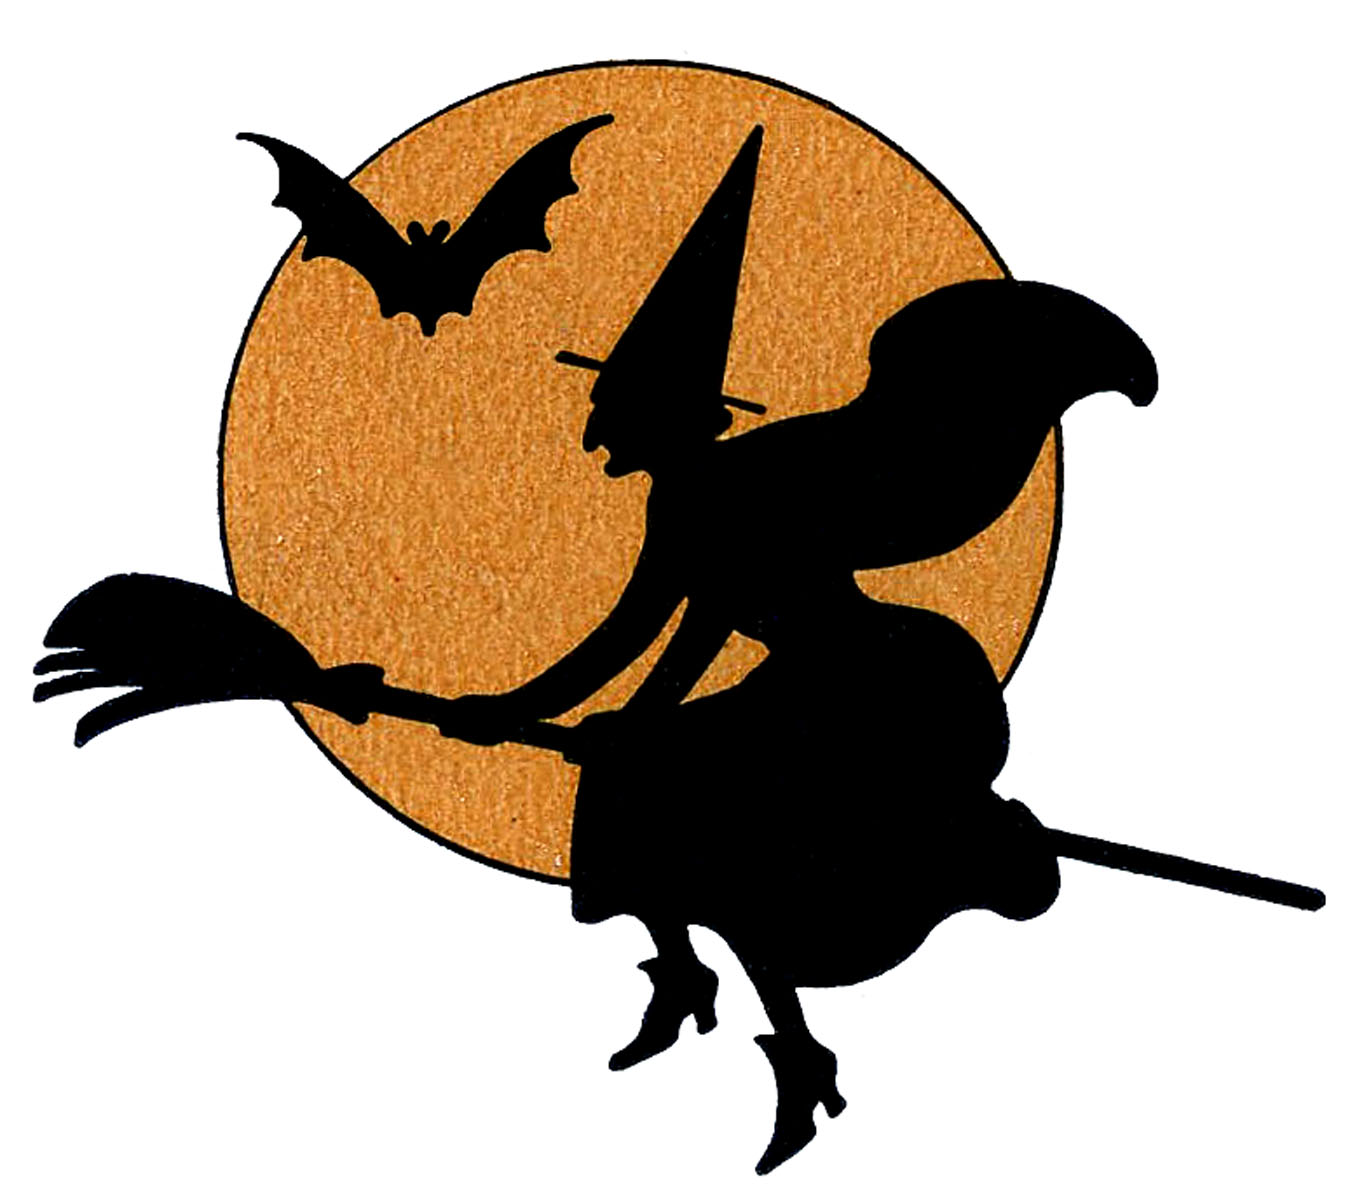 Halloween Clip Art Archives - Page 9 of 13 - The Graphics Fairy